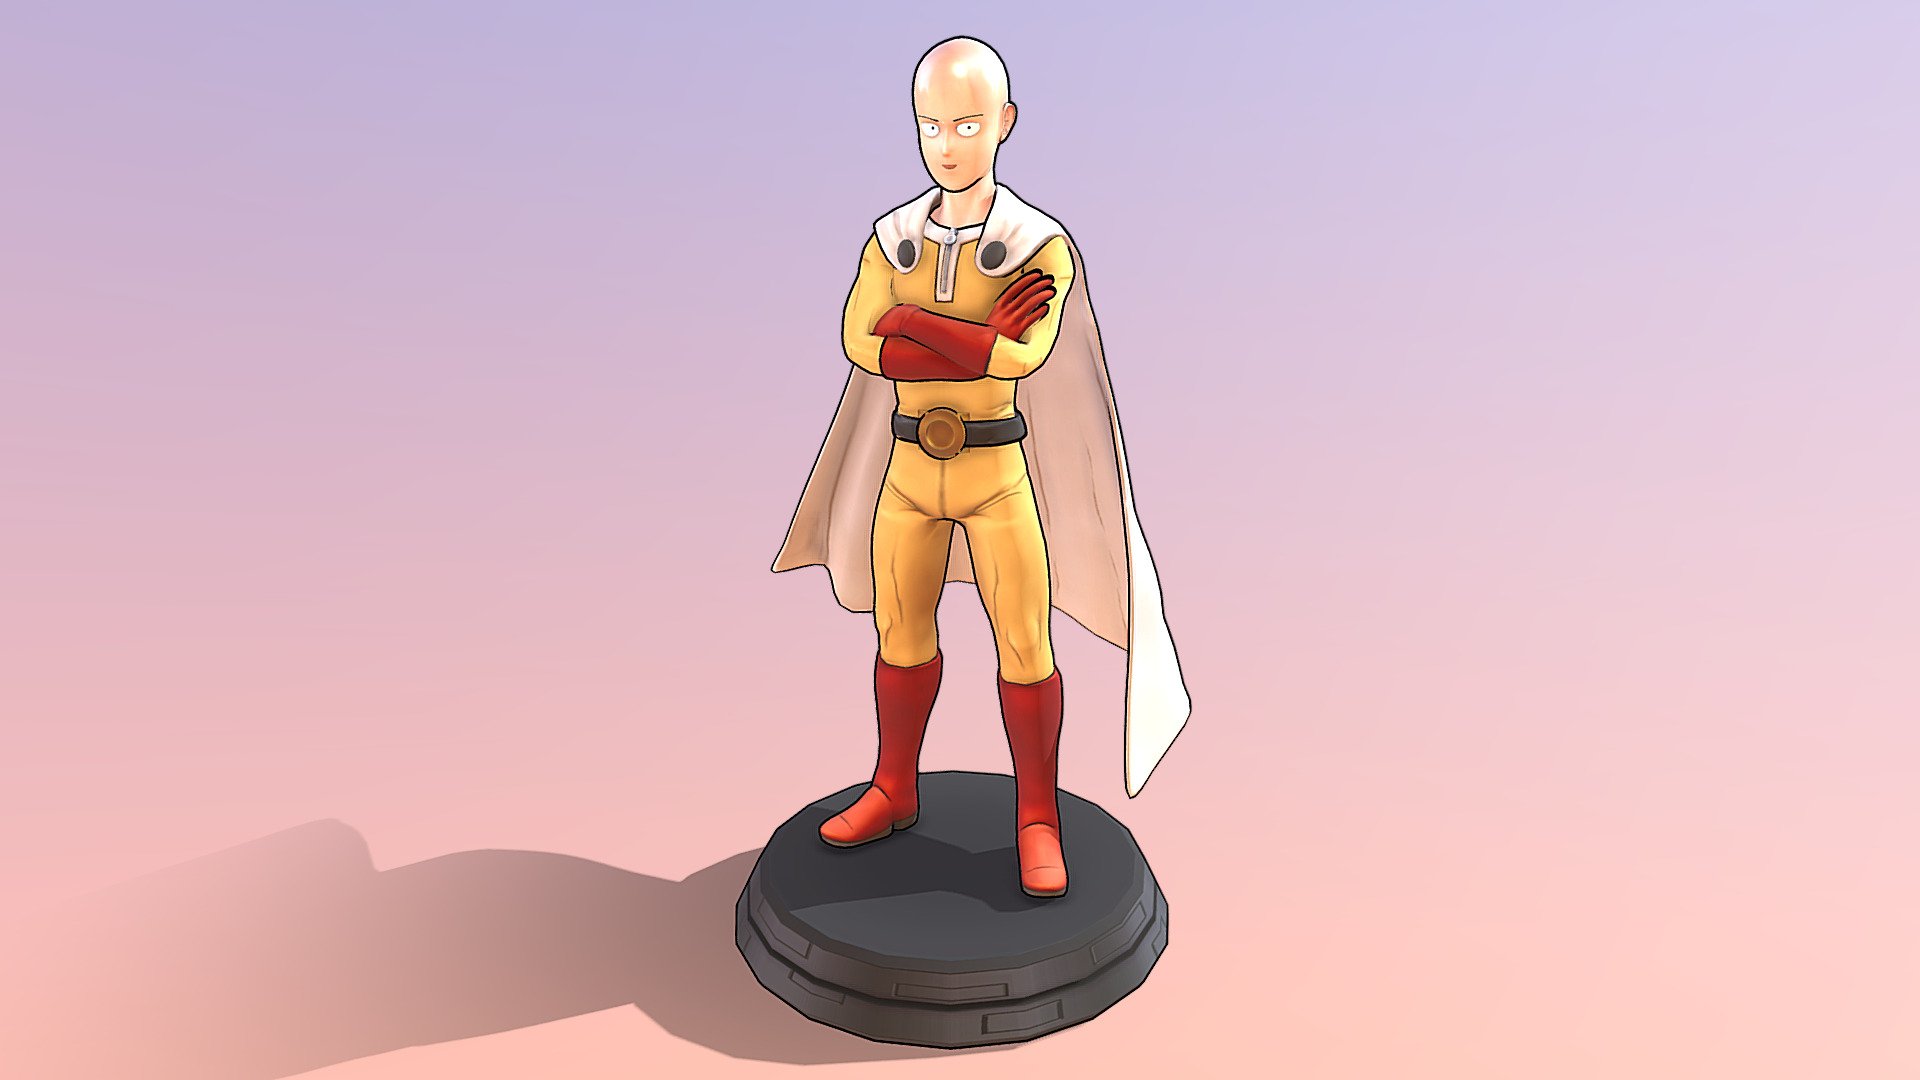 This is the 3rd version of the Saitama 3D character models that I have been working on over the past few weeks. I have learned a lot from creating this character, and am quite OK with the result. More 3D character designs will follow. :)

The initial high-resolution mesh was first sculpted using ZBrush, then ZRemeshed to create the 1st pass of retopology, which was then simplified and adjusted in Maya to make it cleaner and more game-ready. After the model was constructed in the &ldquo;A-pose